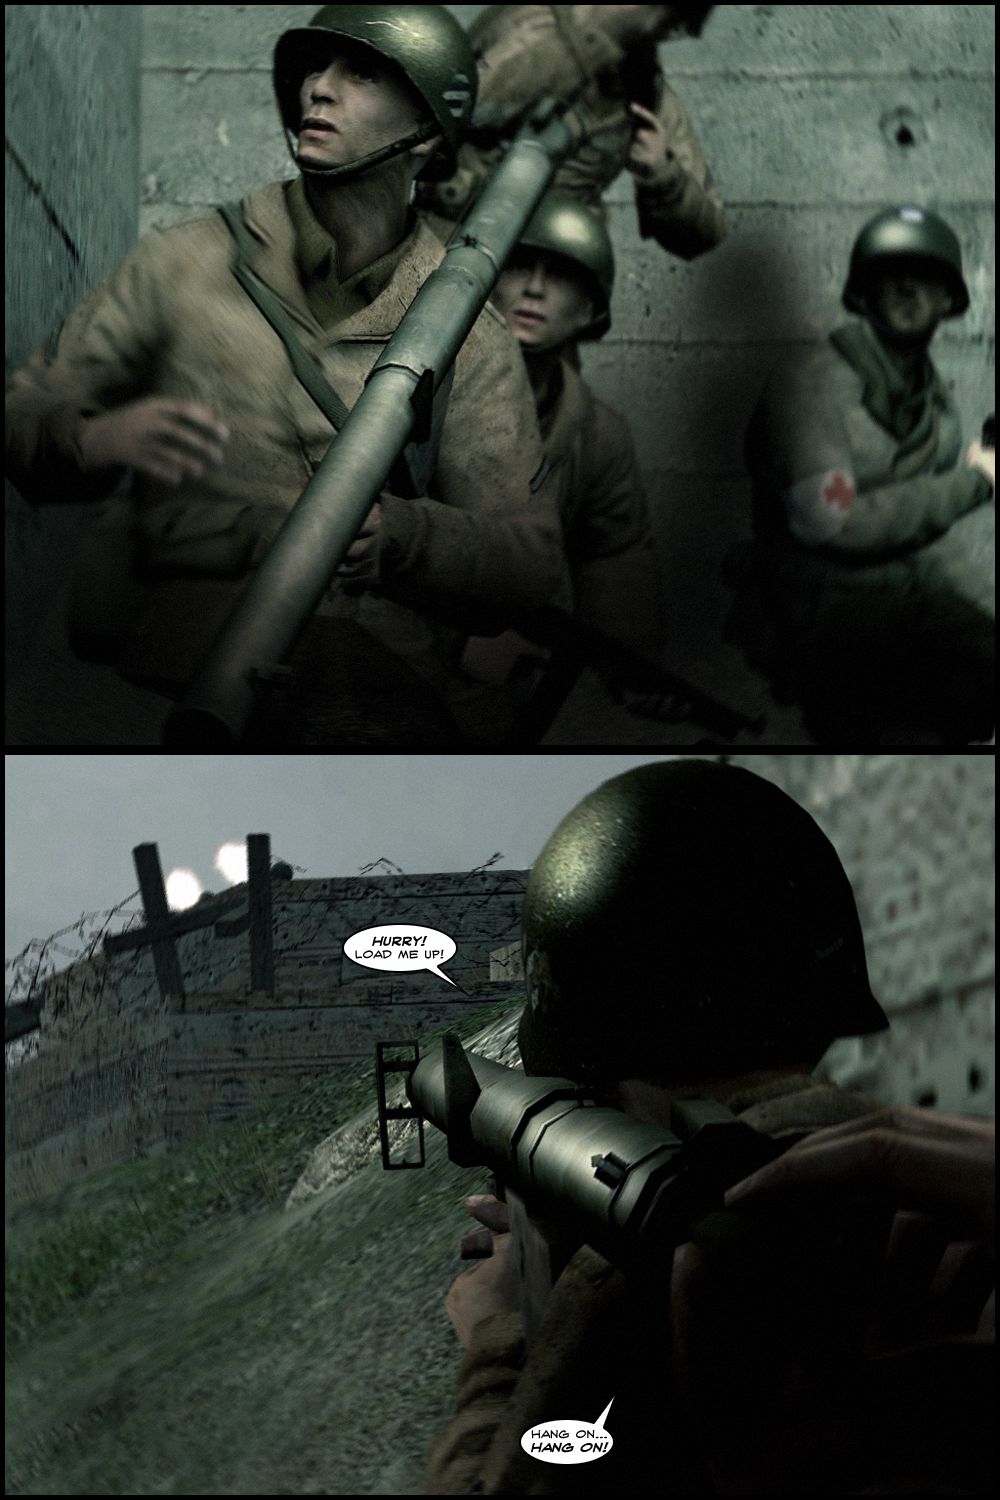 A soldier up front has a bazooka. He aims at the Nazi fortifications and tells the others to hurry and load him up.